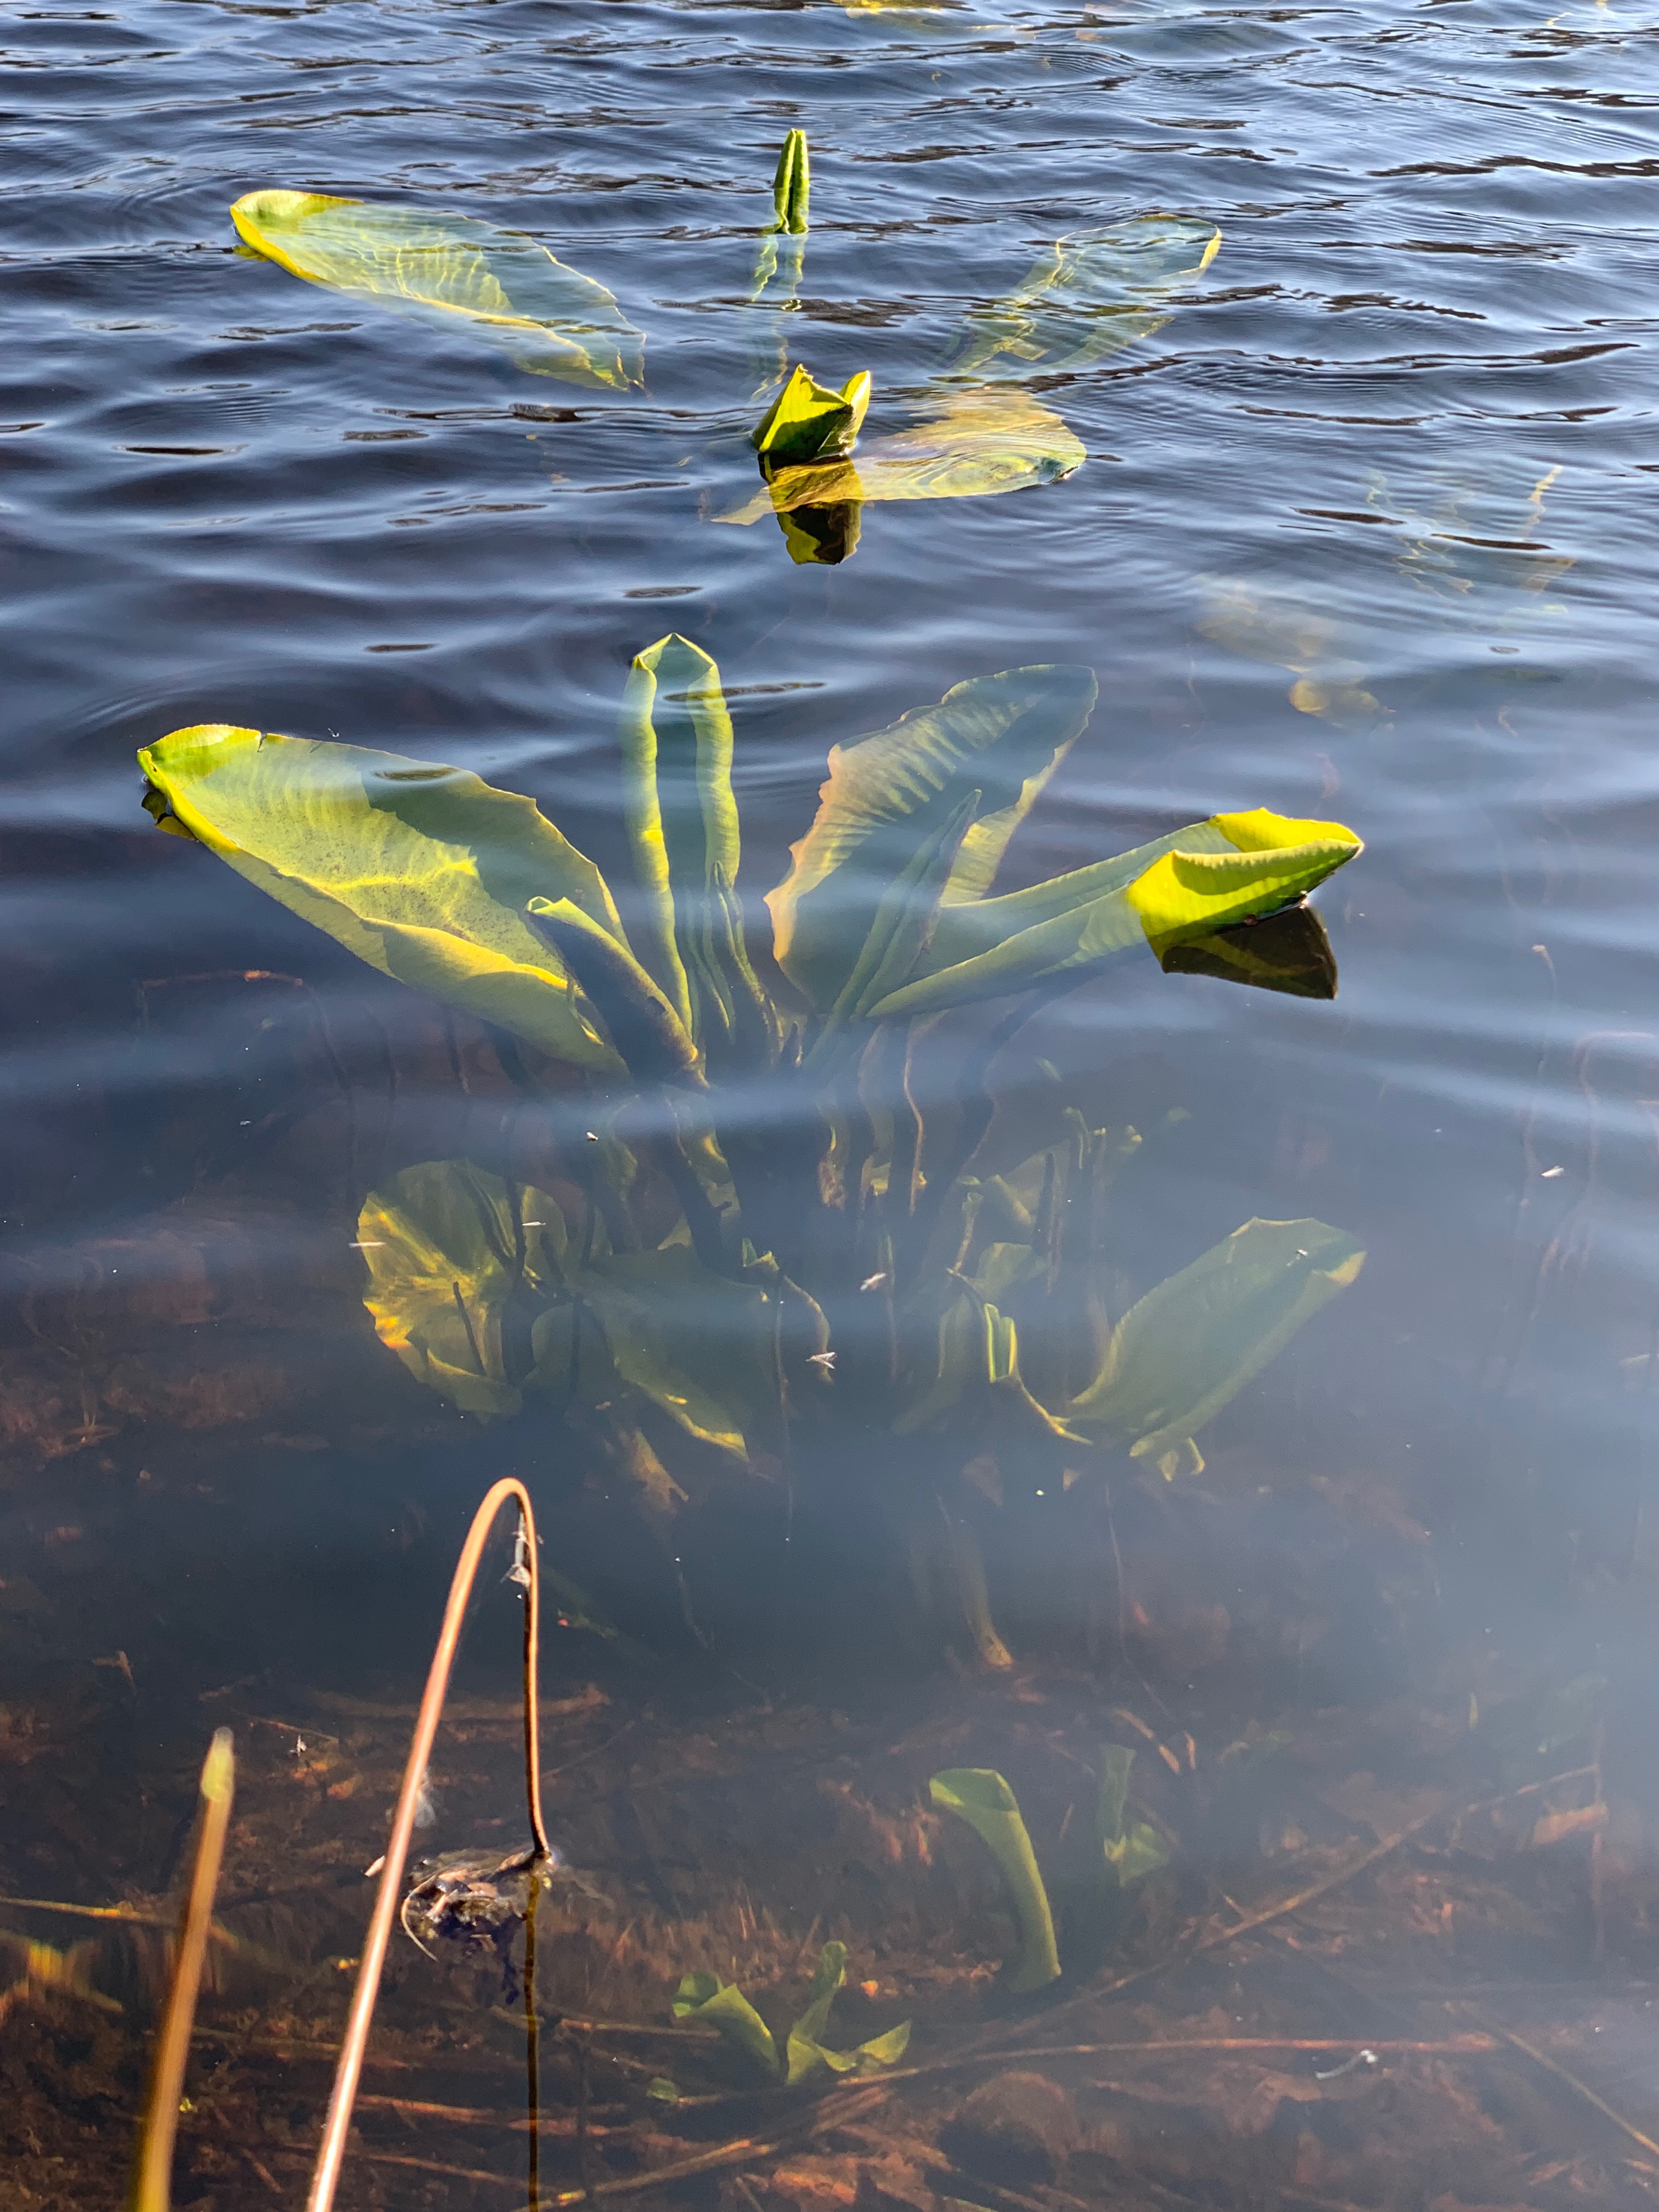 Lilies growing up from the bottom of the lake with water ripples on the surface